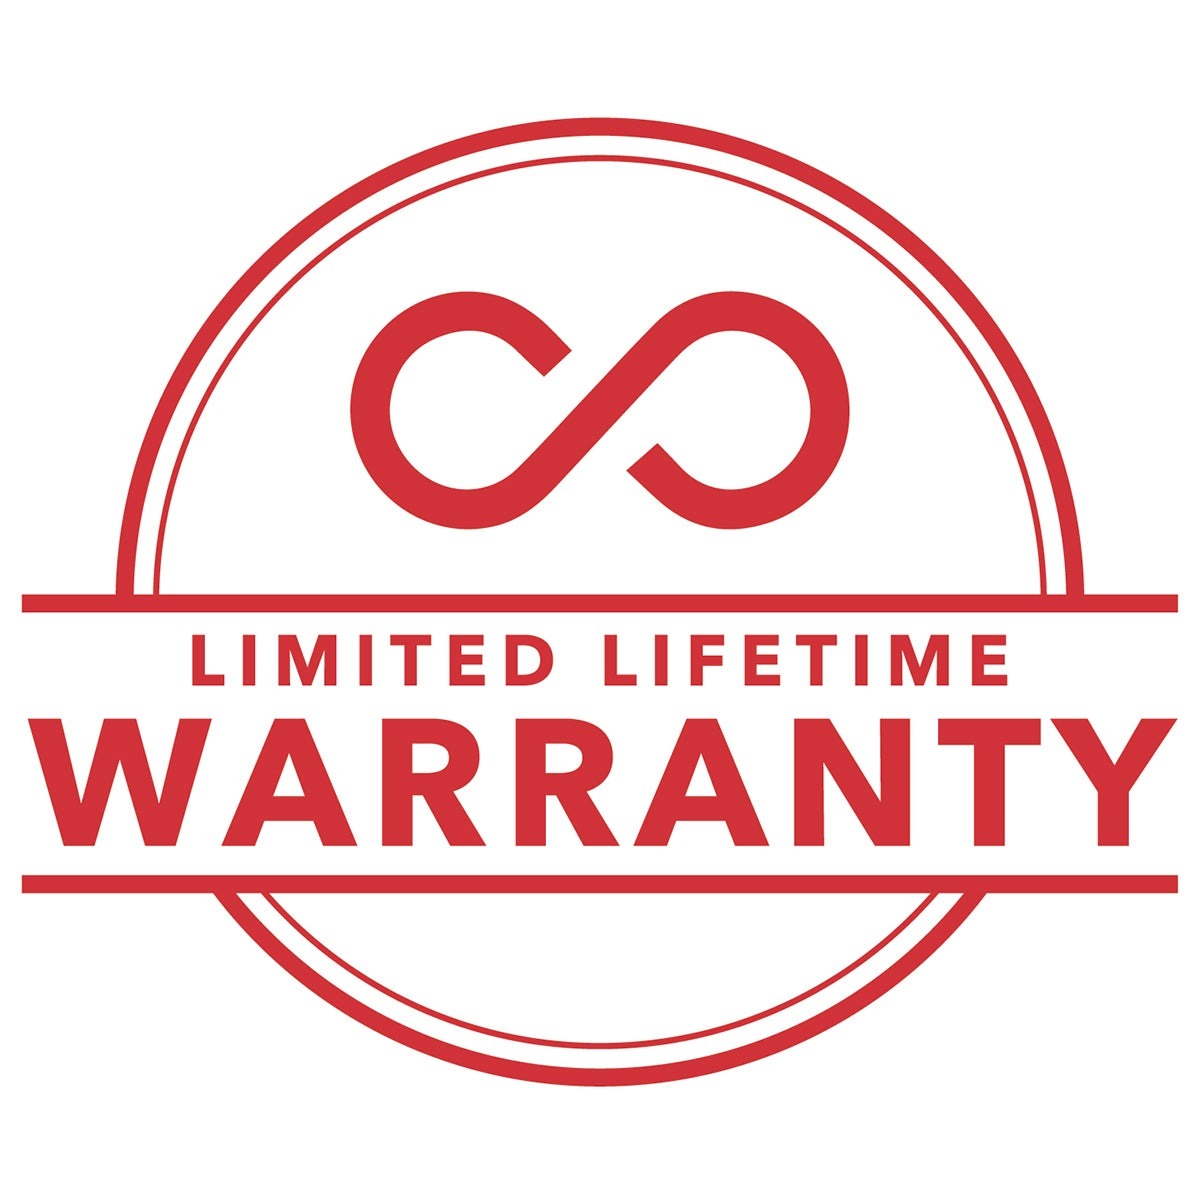 Limited Lifetime Warranty ||
ZAGG warrants the product against wear and damage during the lifetime of the device for which the product was purchased.